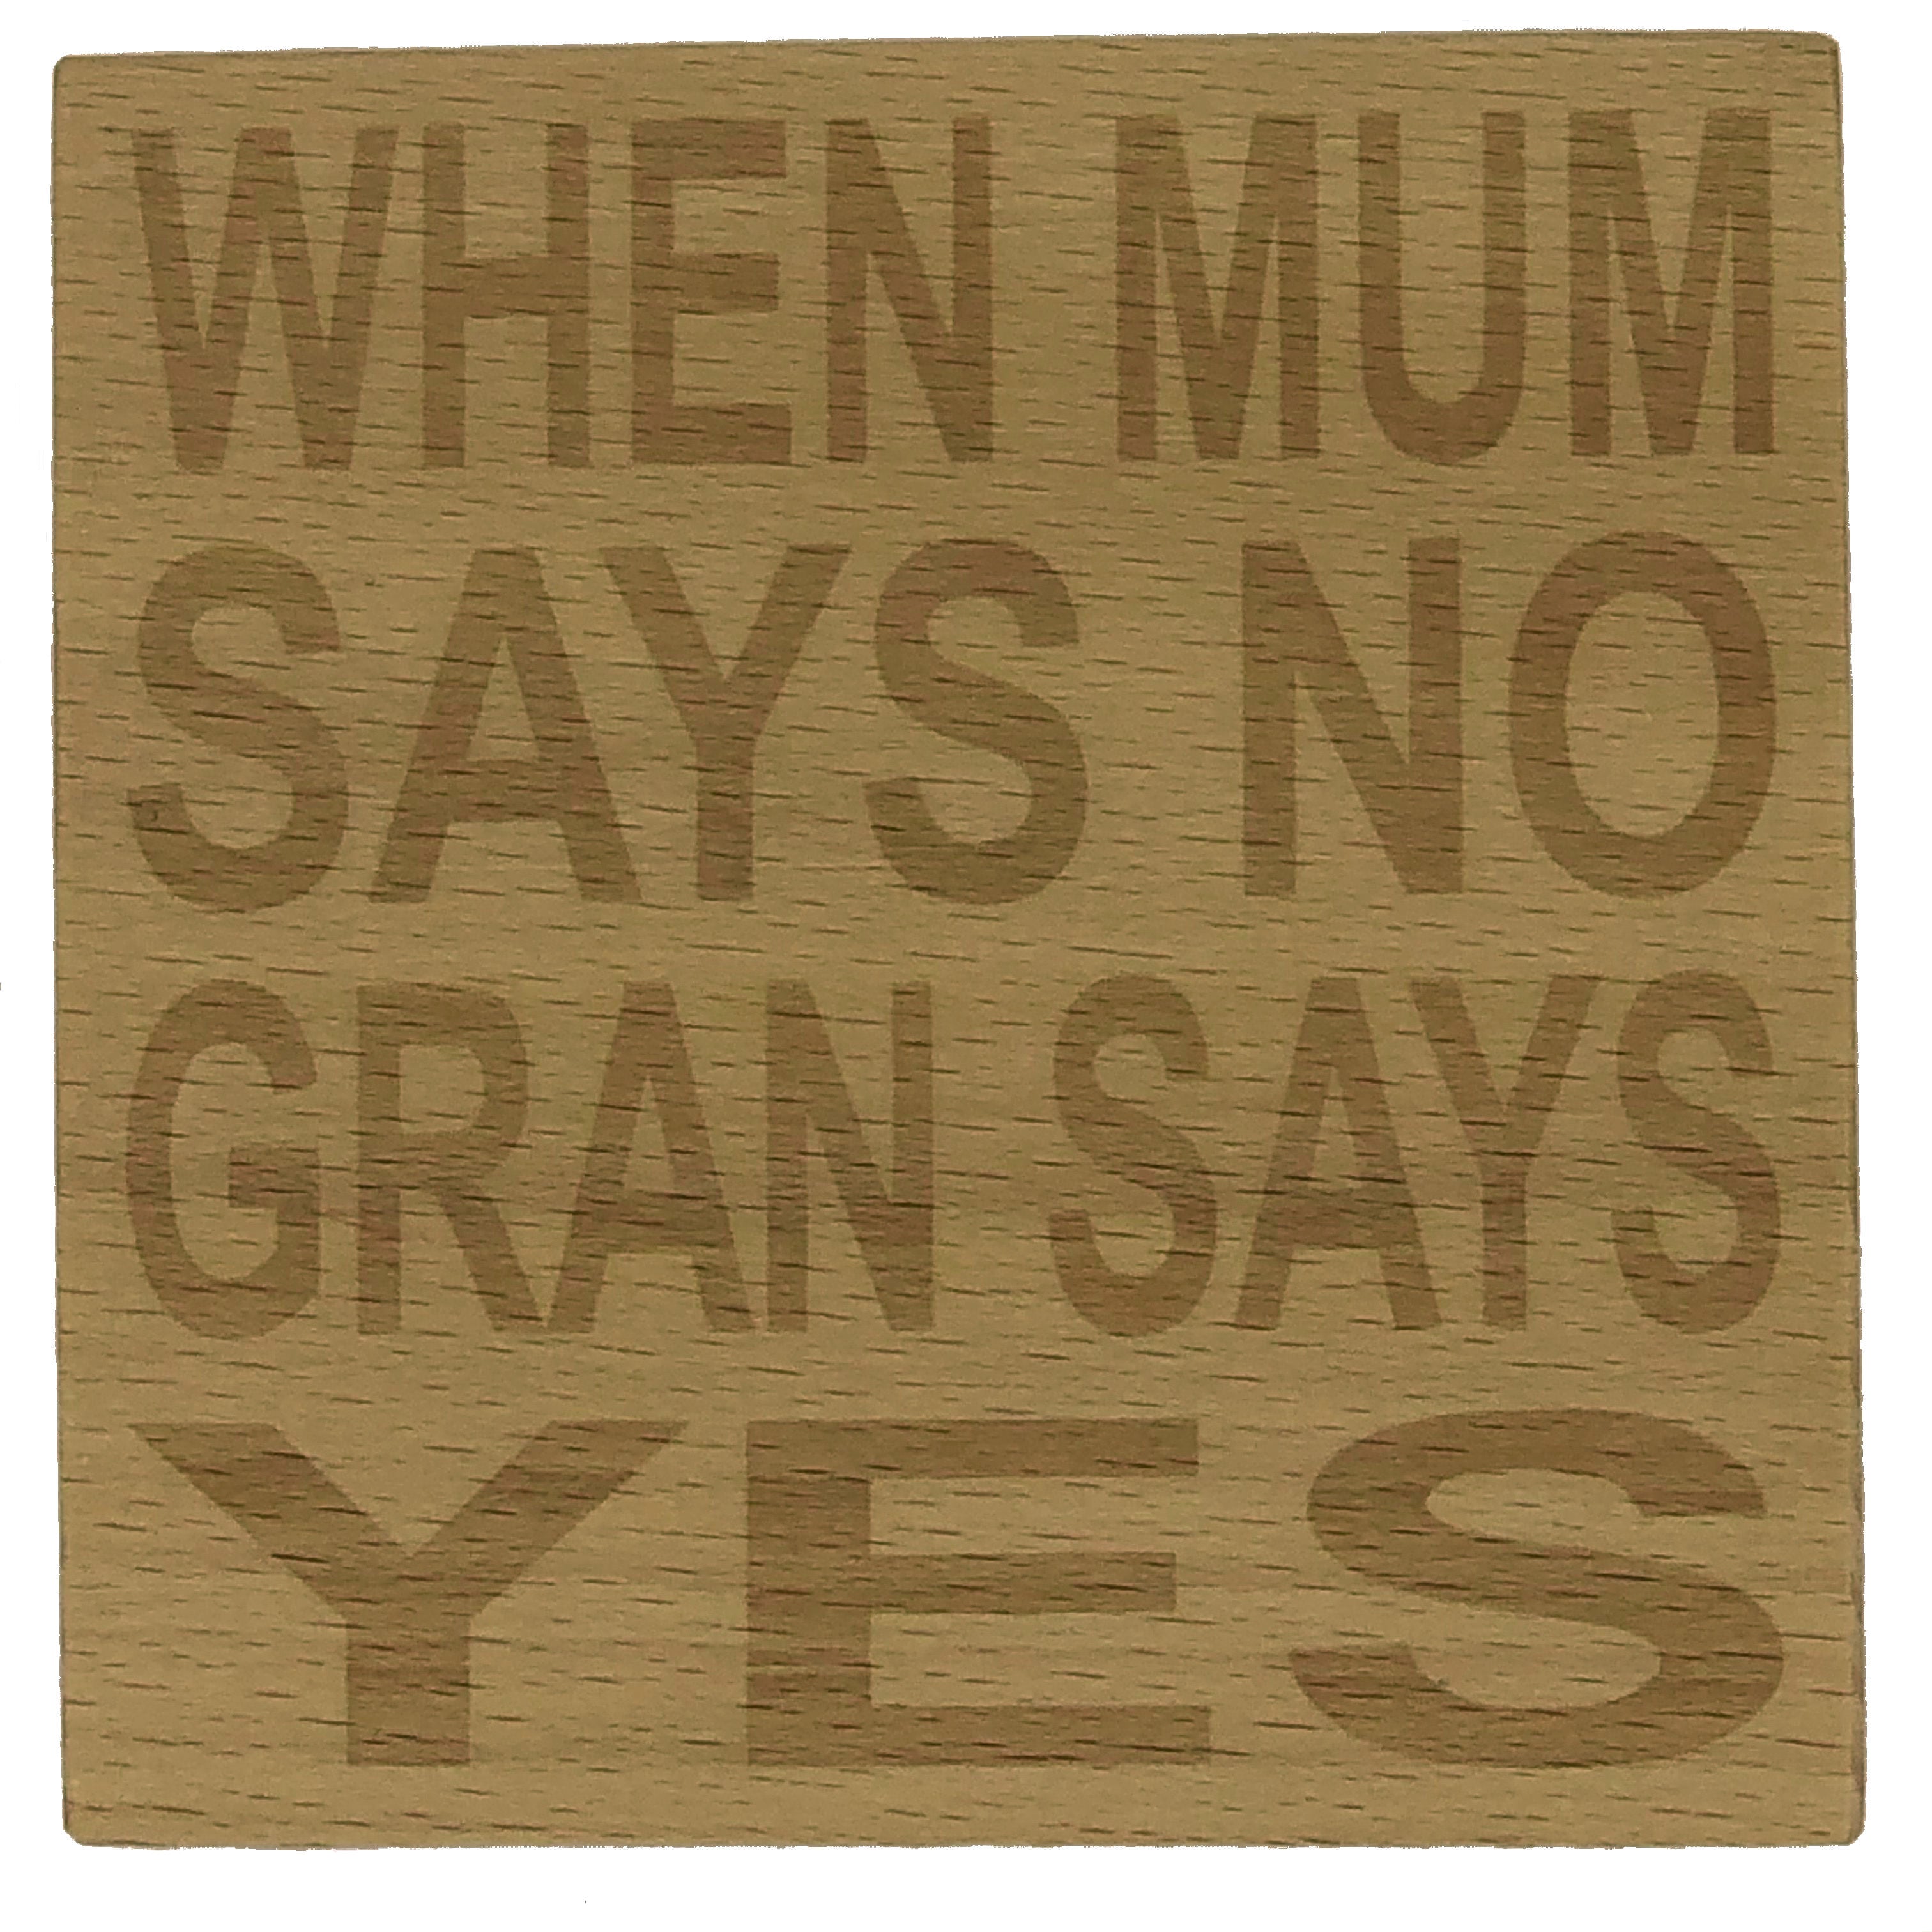 Wooden coaster gift for mothers and grandmas - when mum says no gran says yes - varnished for protection